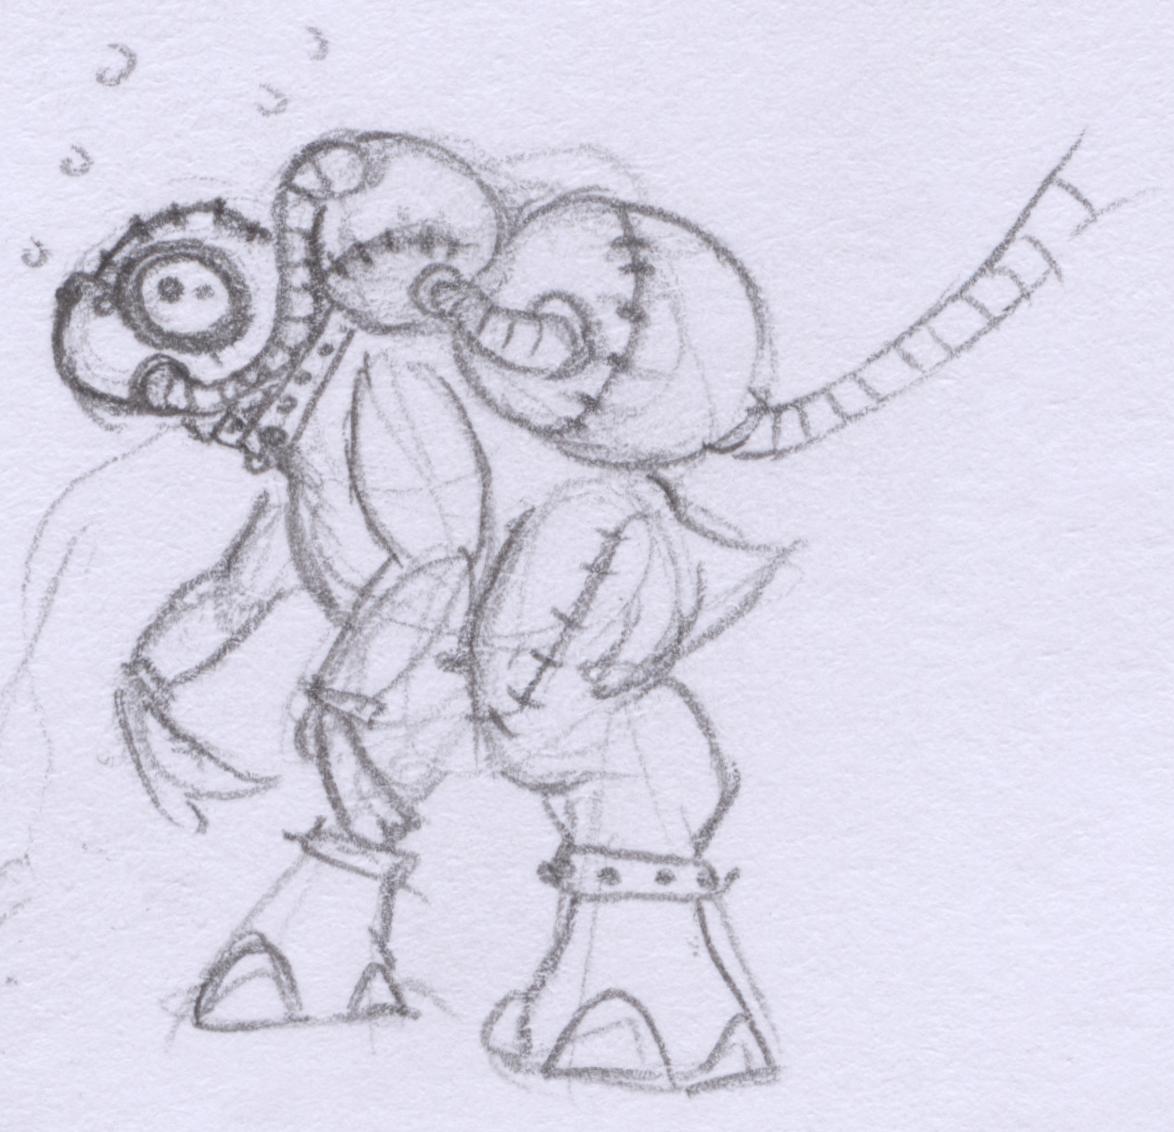 A fubarnii in a diving suit